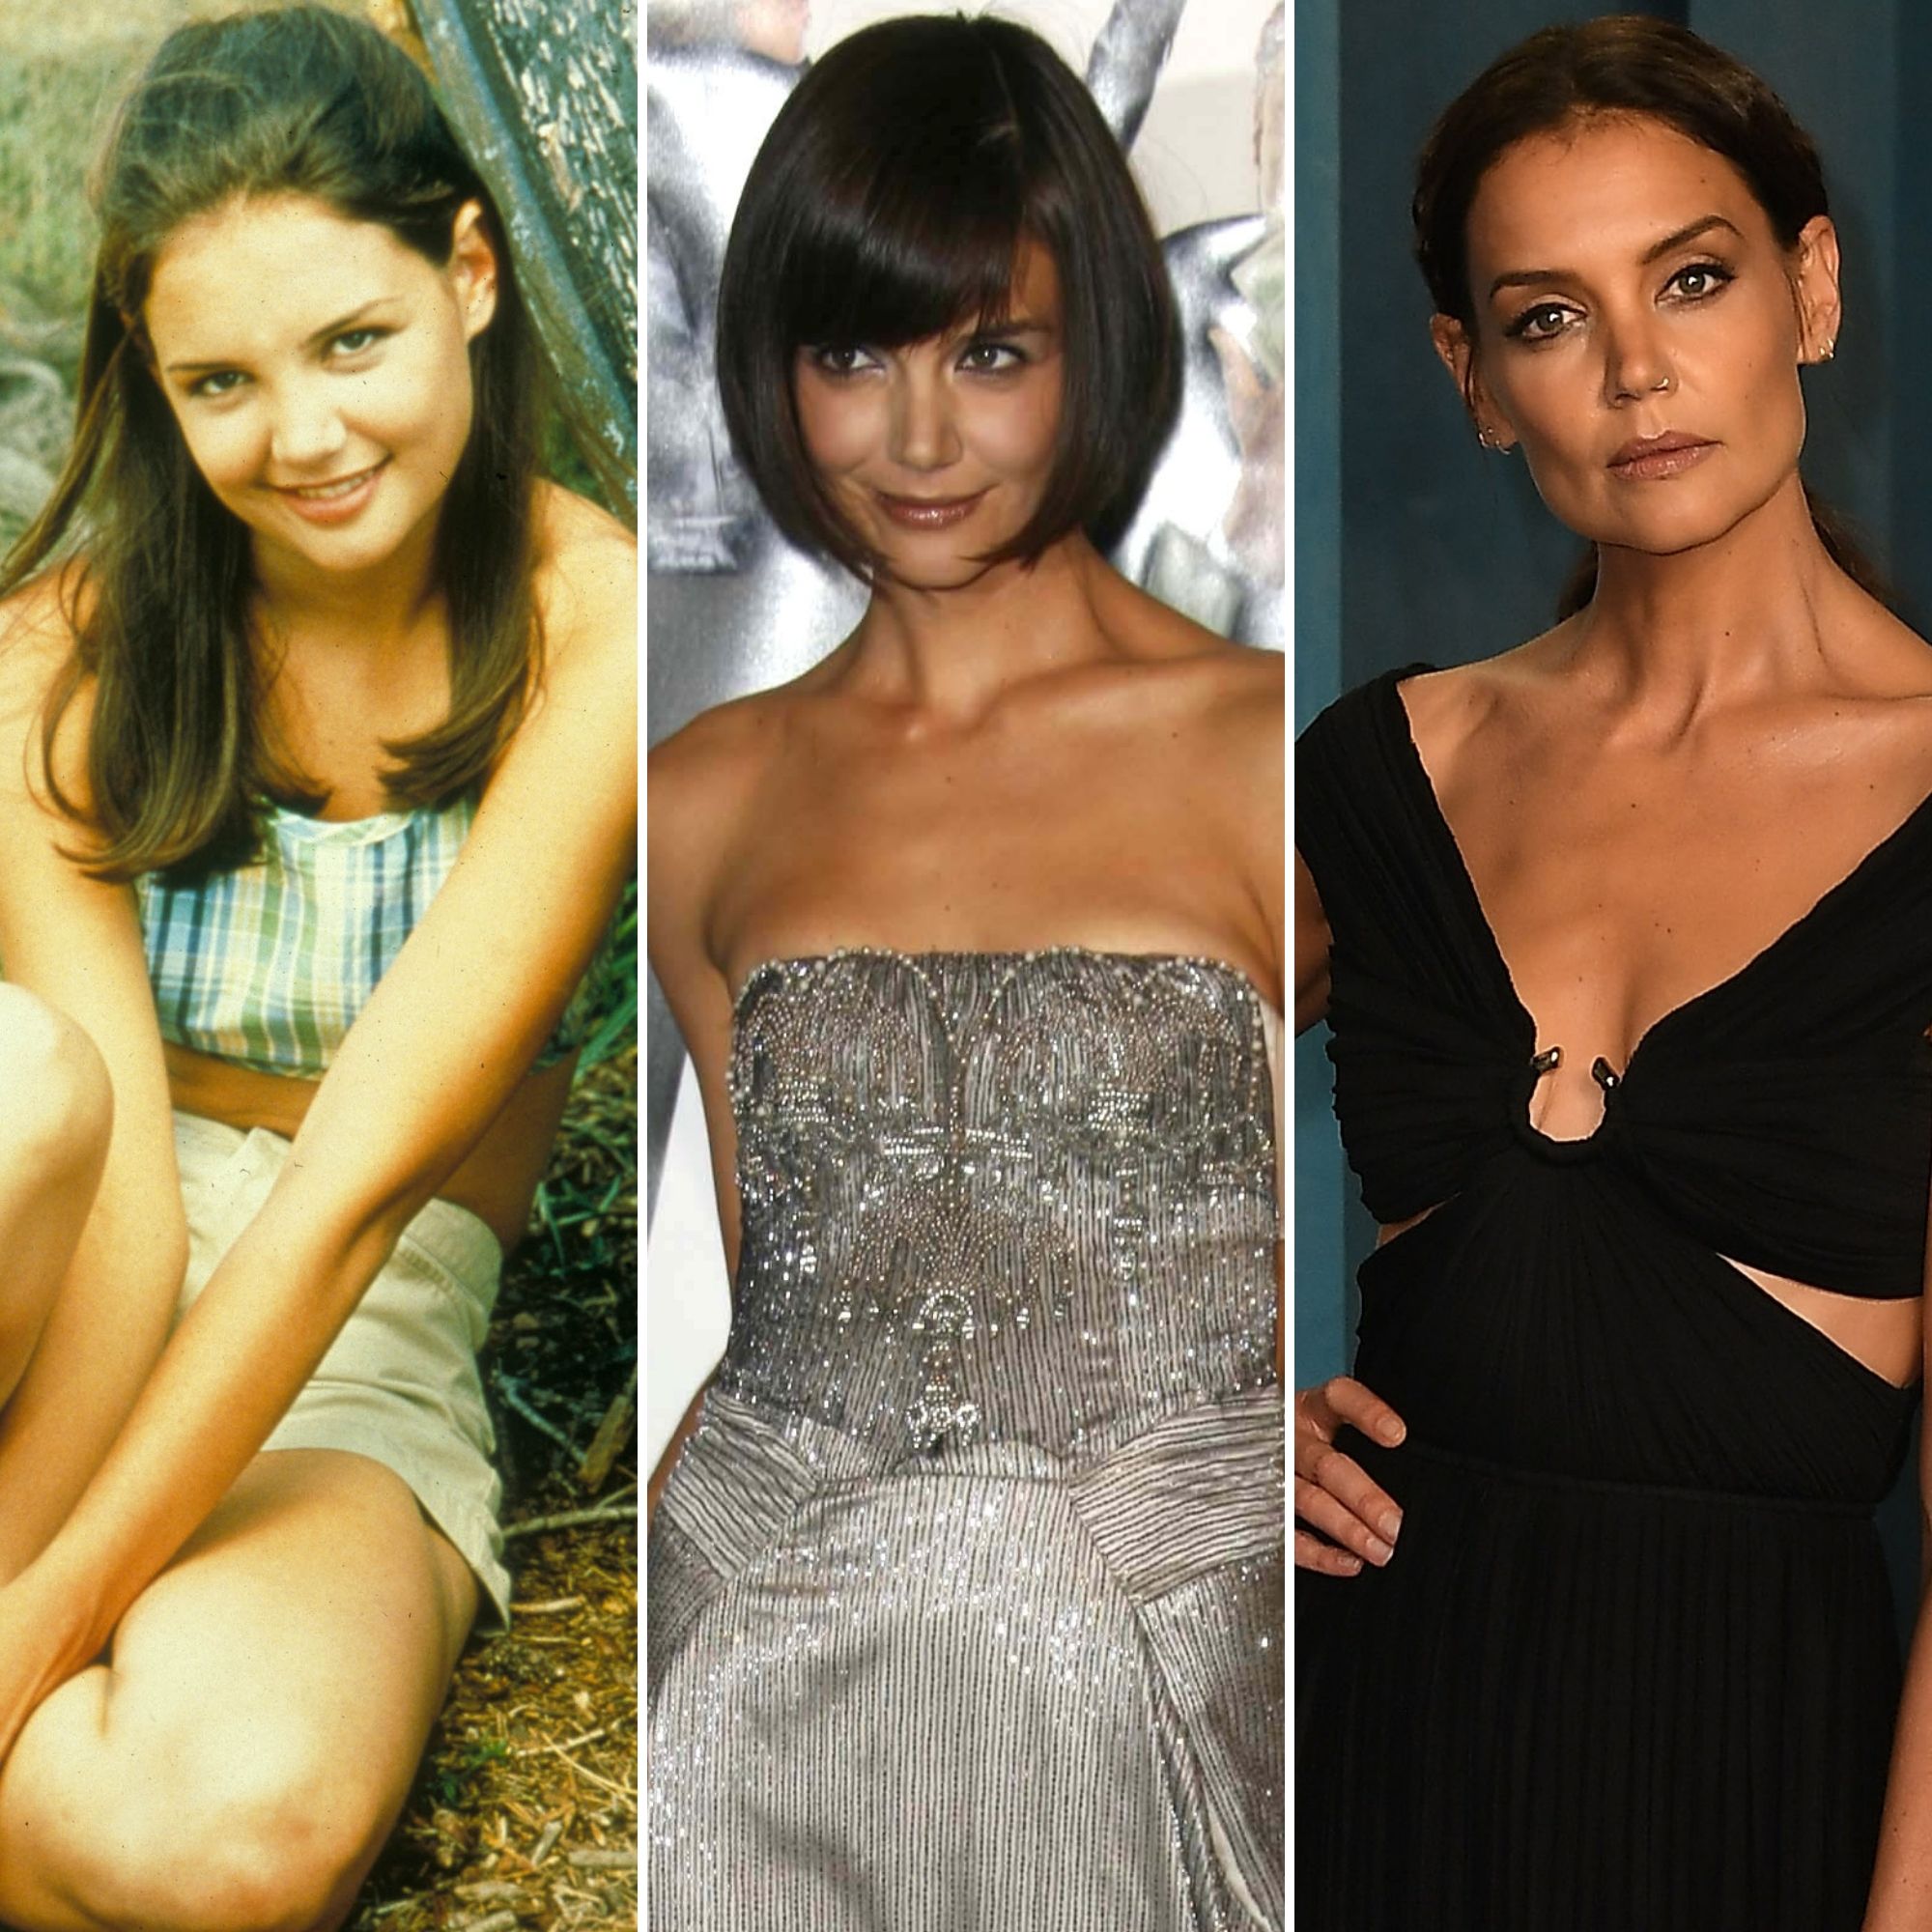 https://www.closerweekly.com/wp-content/uploads/2022/05/Katie-Holmes-Transformation-Photos-Young-vs-Now-.jpg?fit=2000%2C2000&quality=86&strip=all